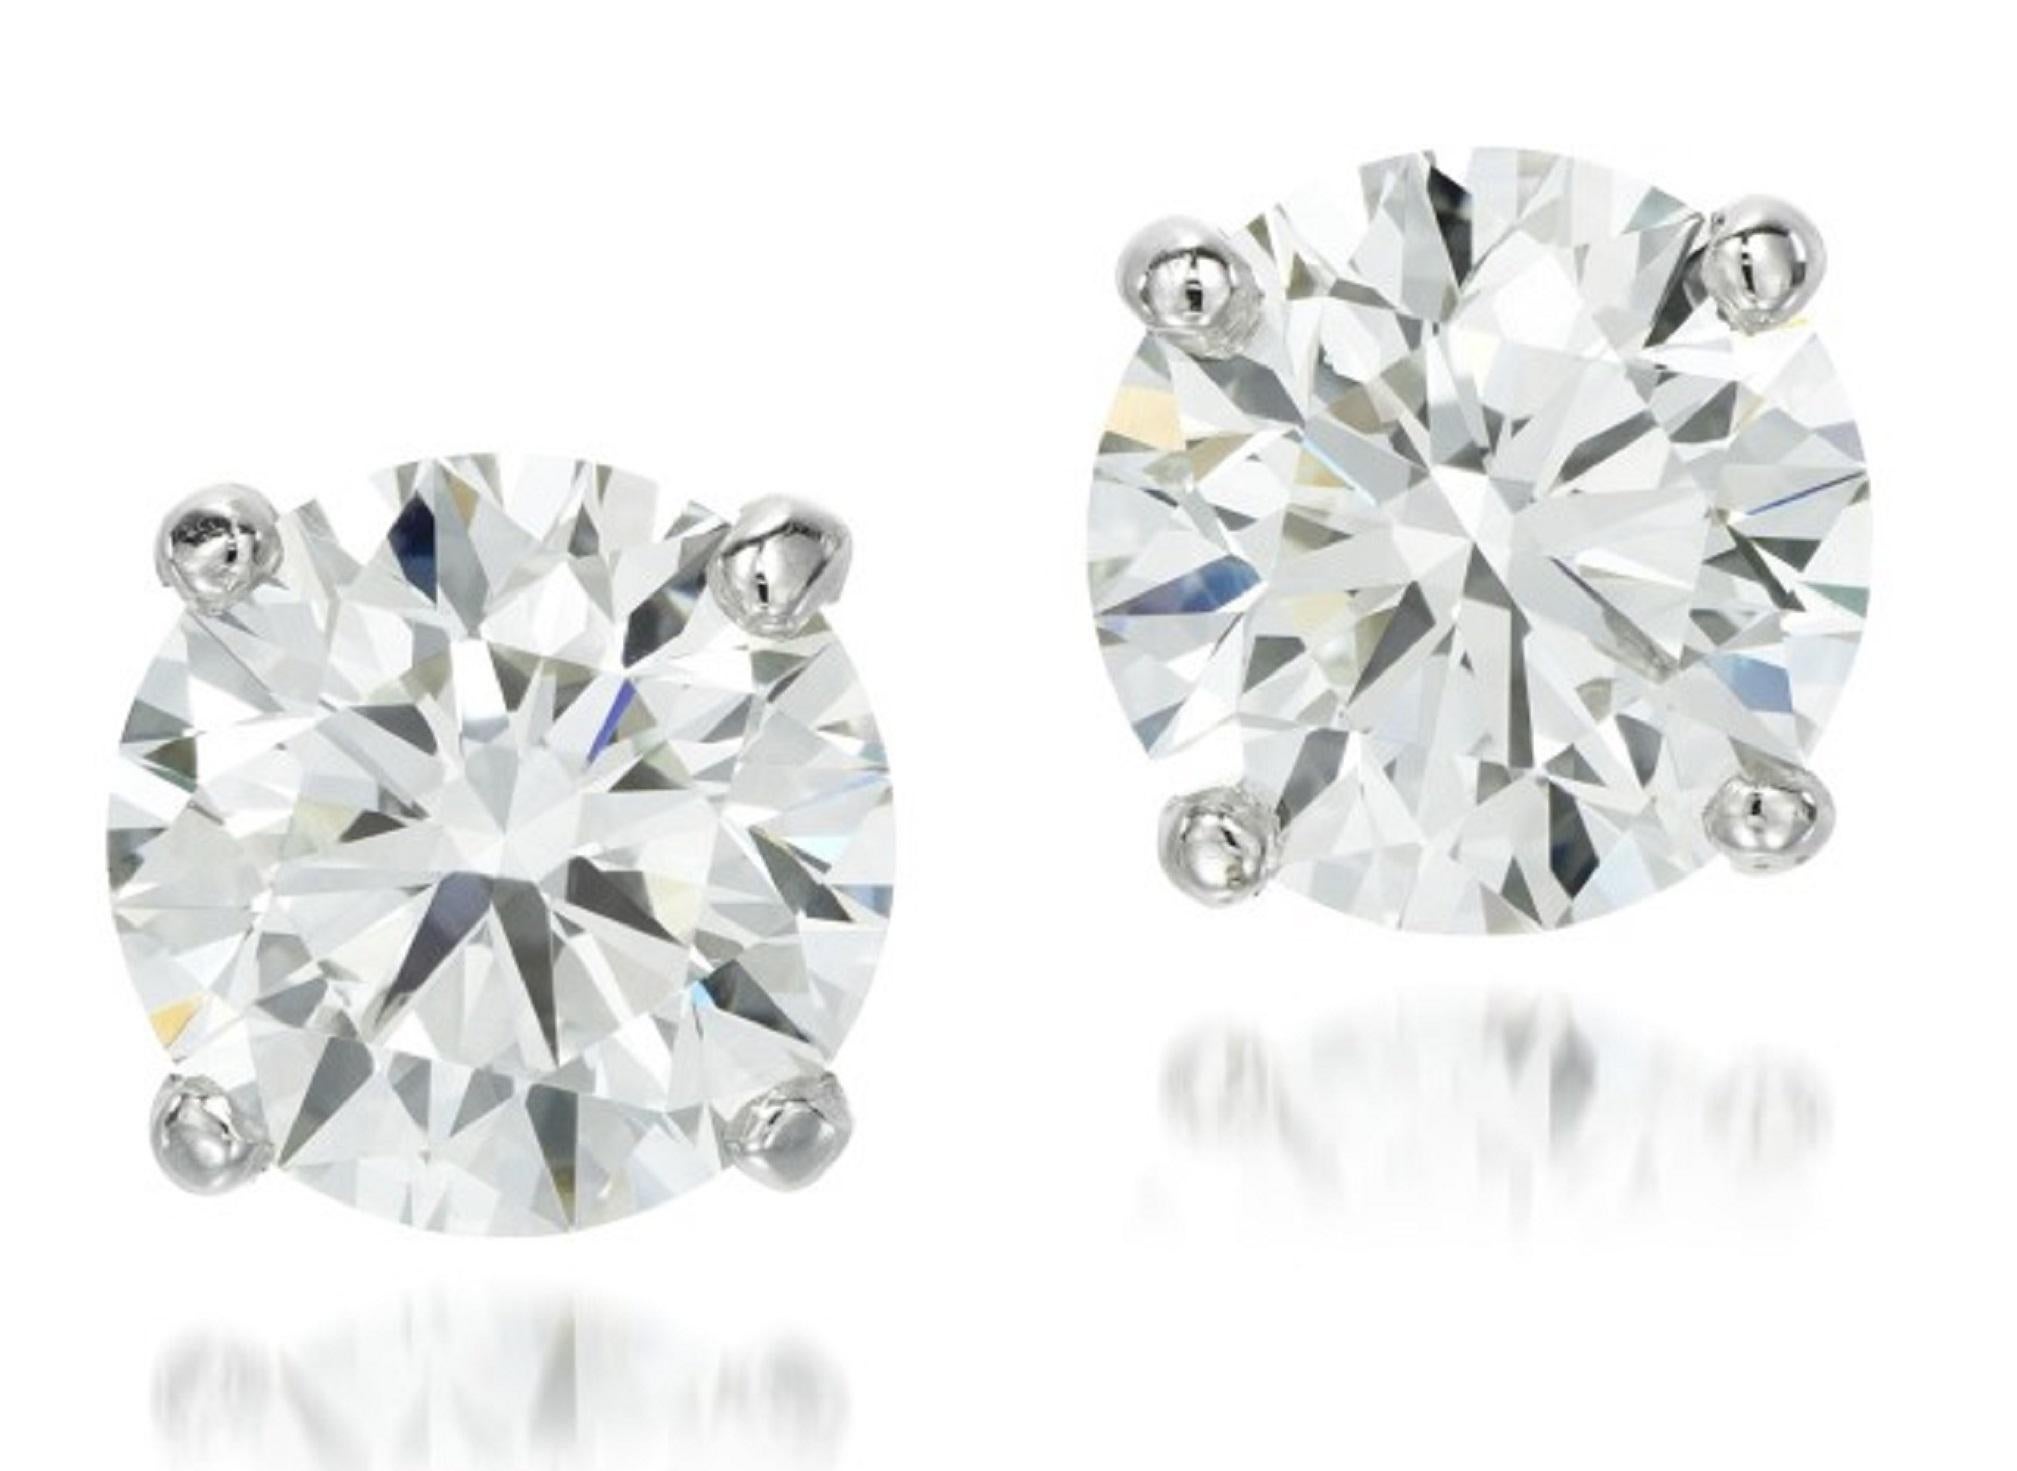 This striking 2.29 carat pair of round brilliant cut certified diamonds is bright white, eye clean, and dazzlingly brilliant! These diamonds were individually hand selected for their superior color, well hidden inclusions, and beautiful, crisp